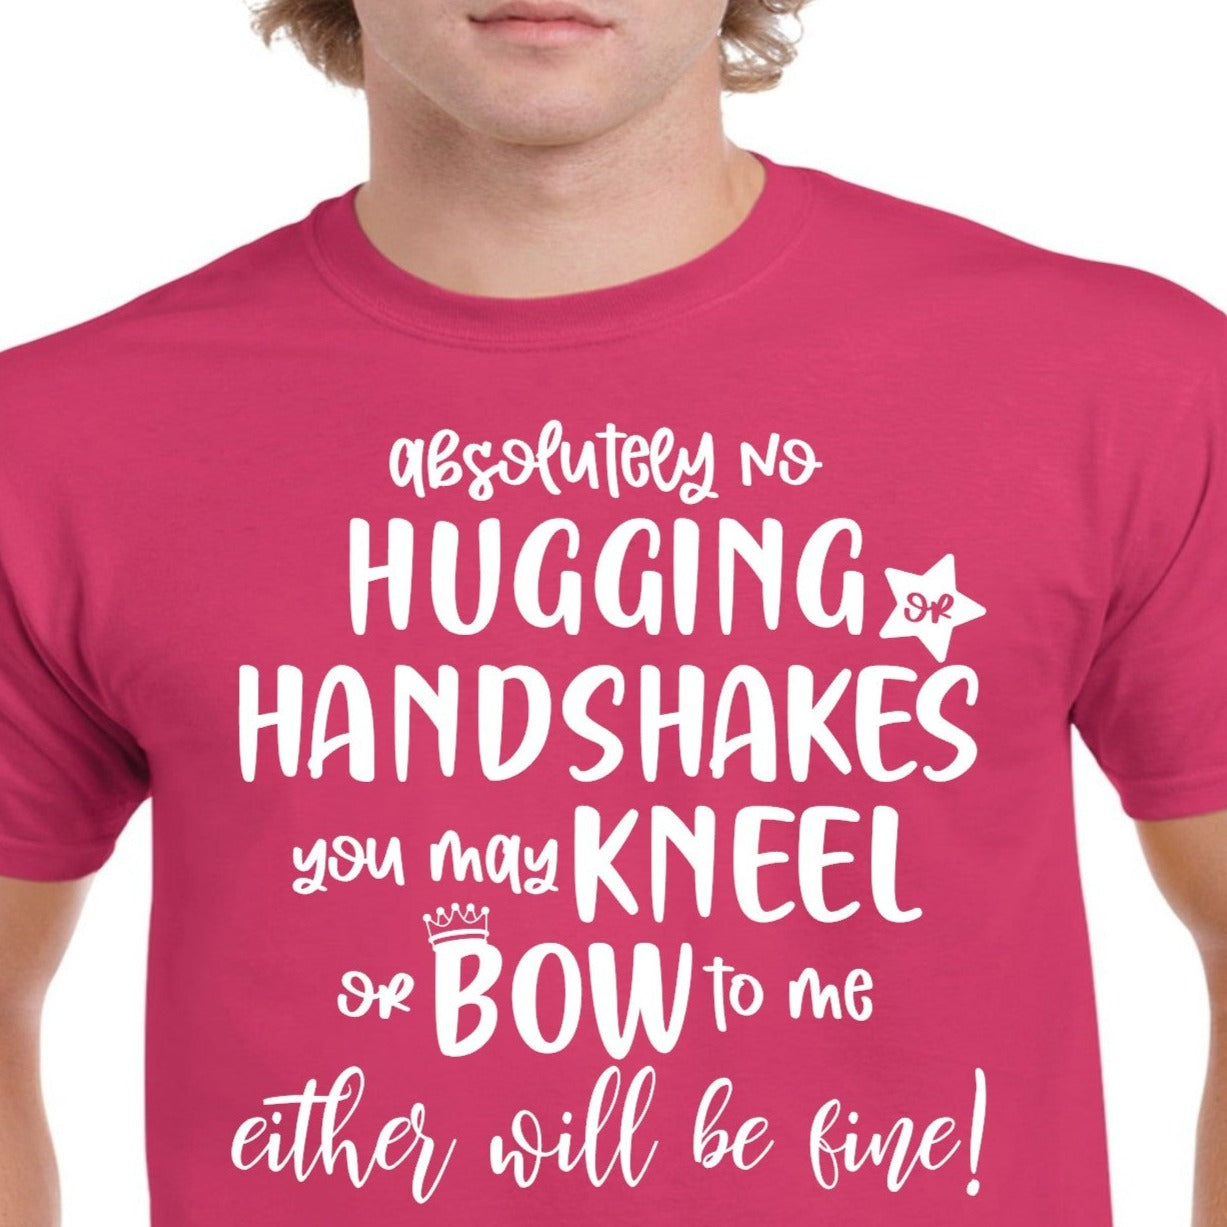 Absolutely no Hugging or Handshakes you may kneel or Bow to me Either will be fine